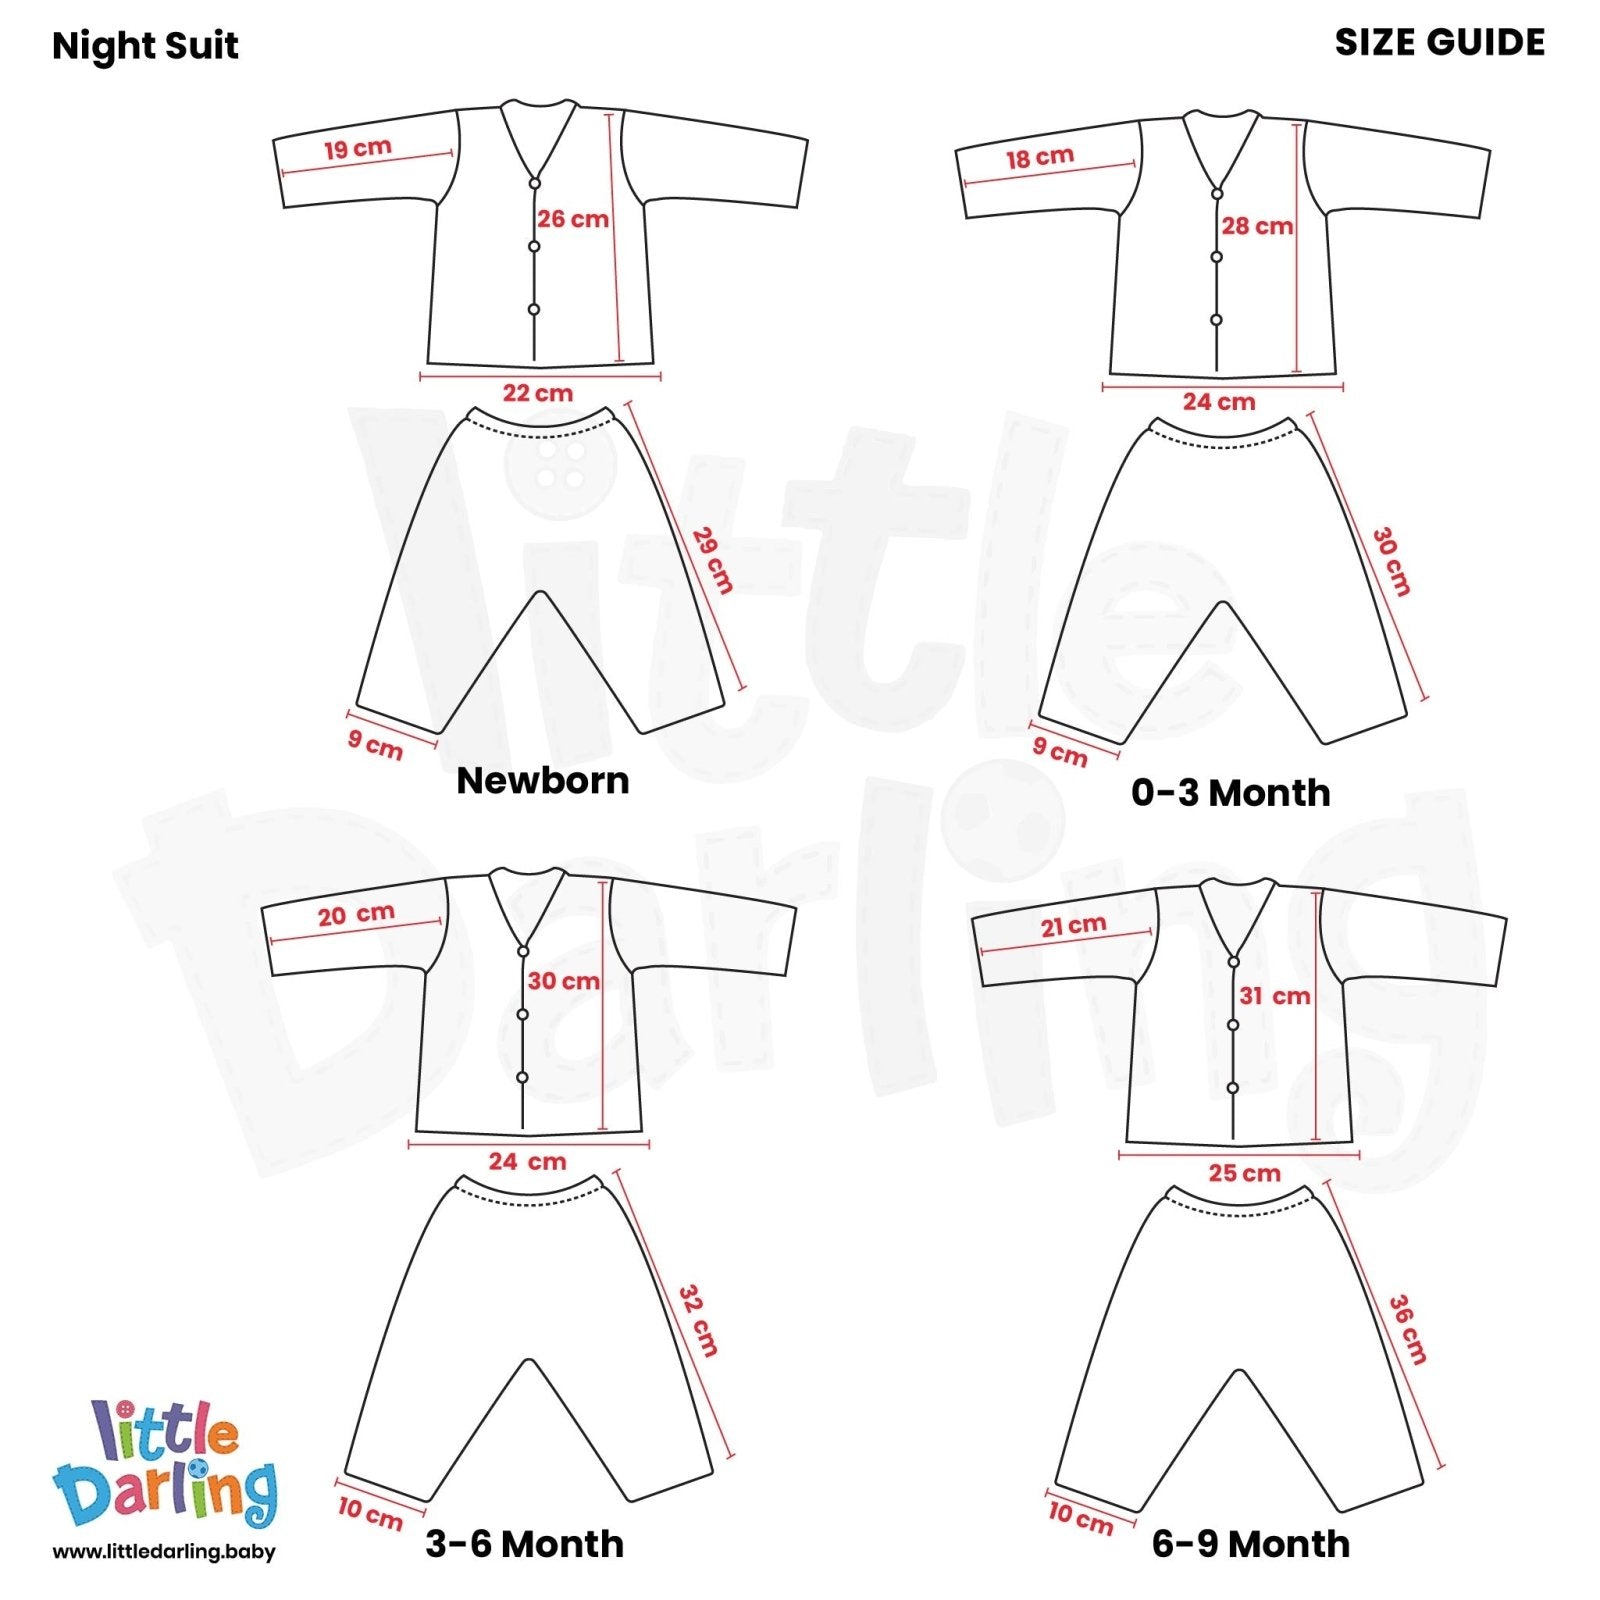 Baby Night Suit Truck & Car Print by Little Darling